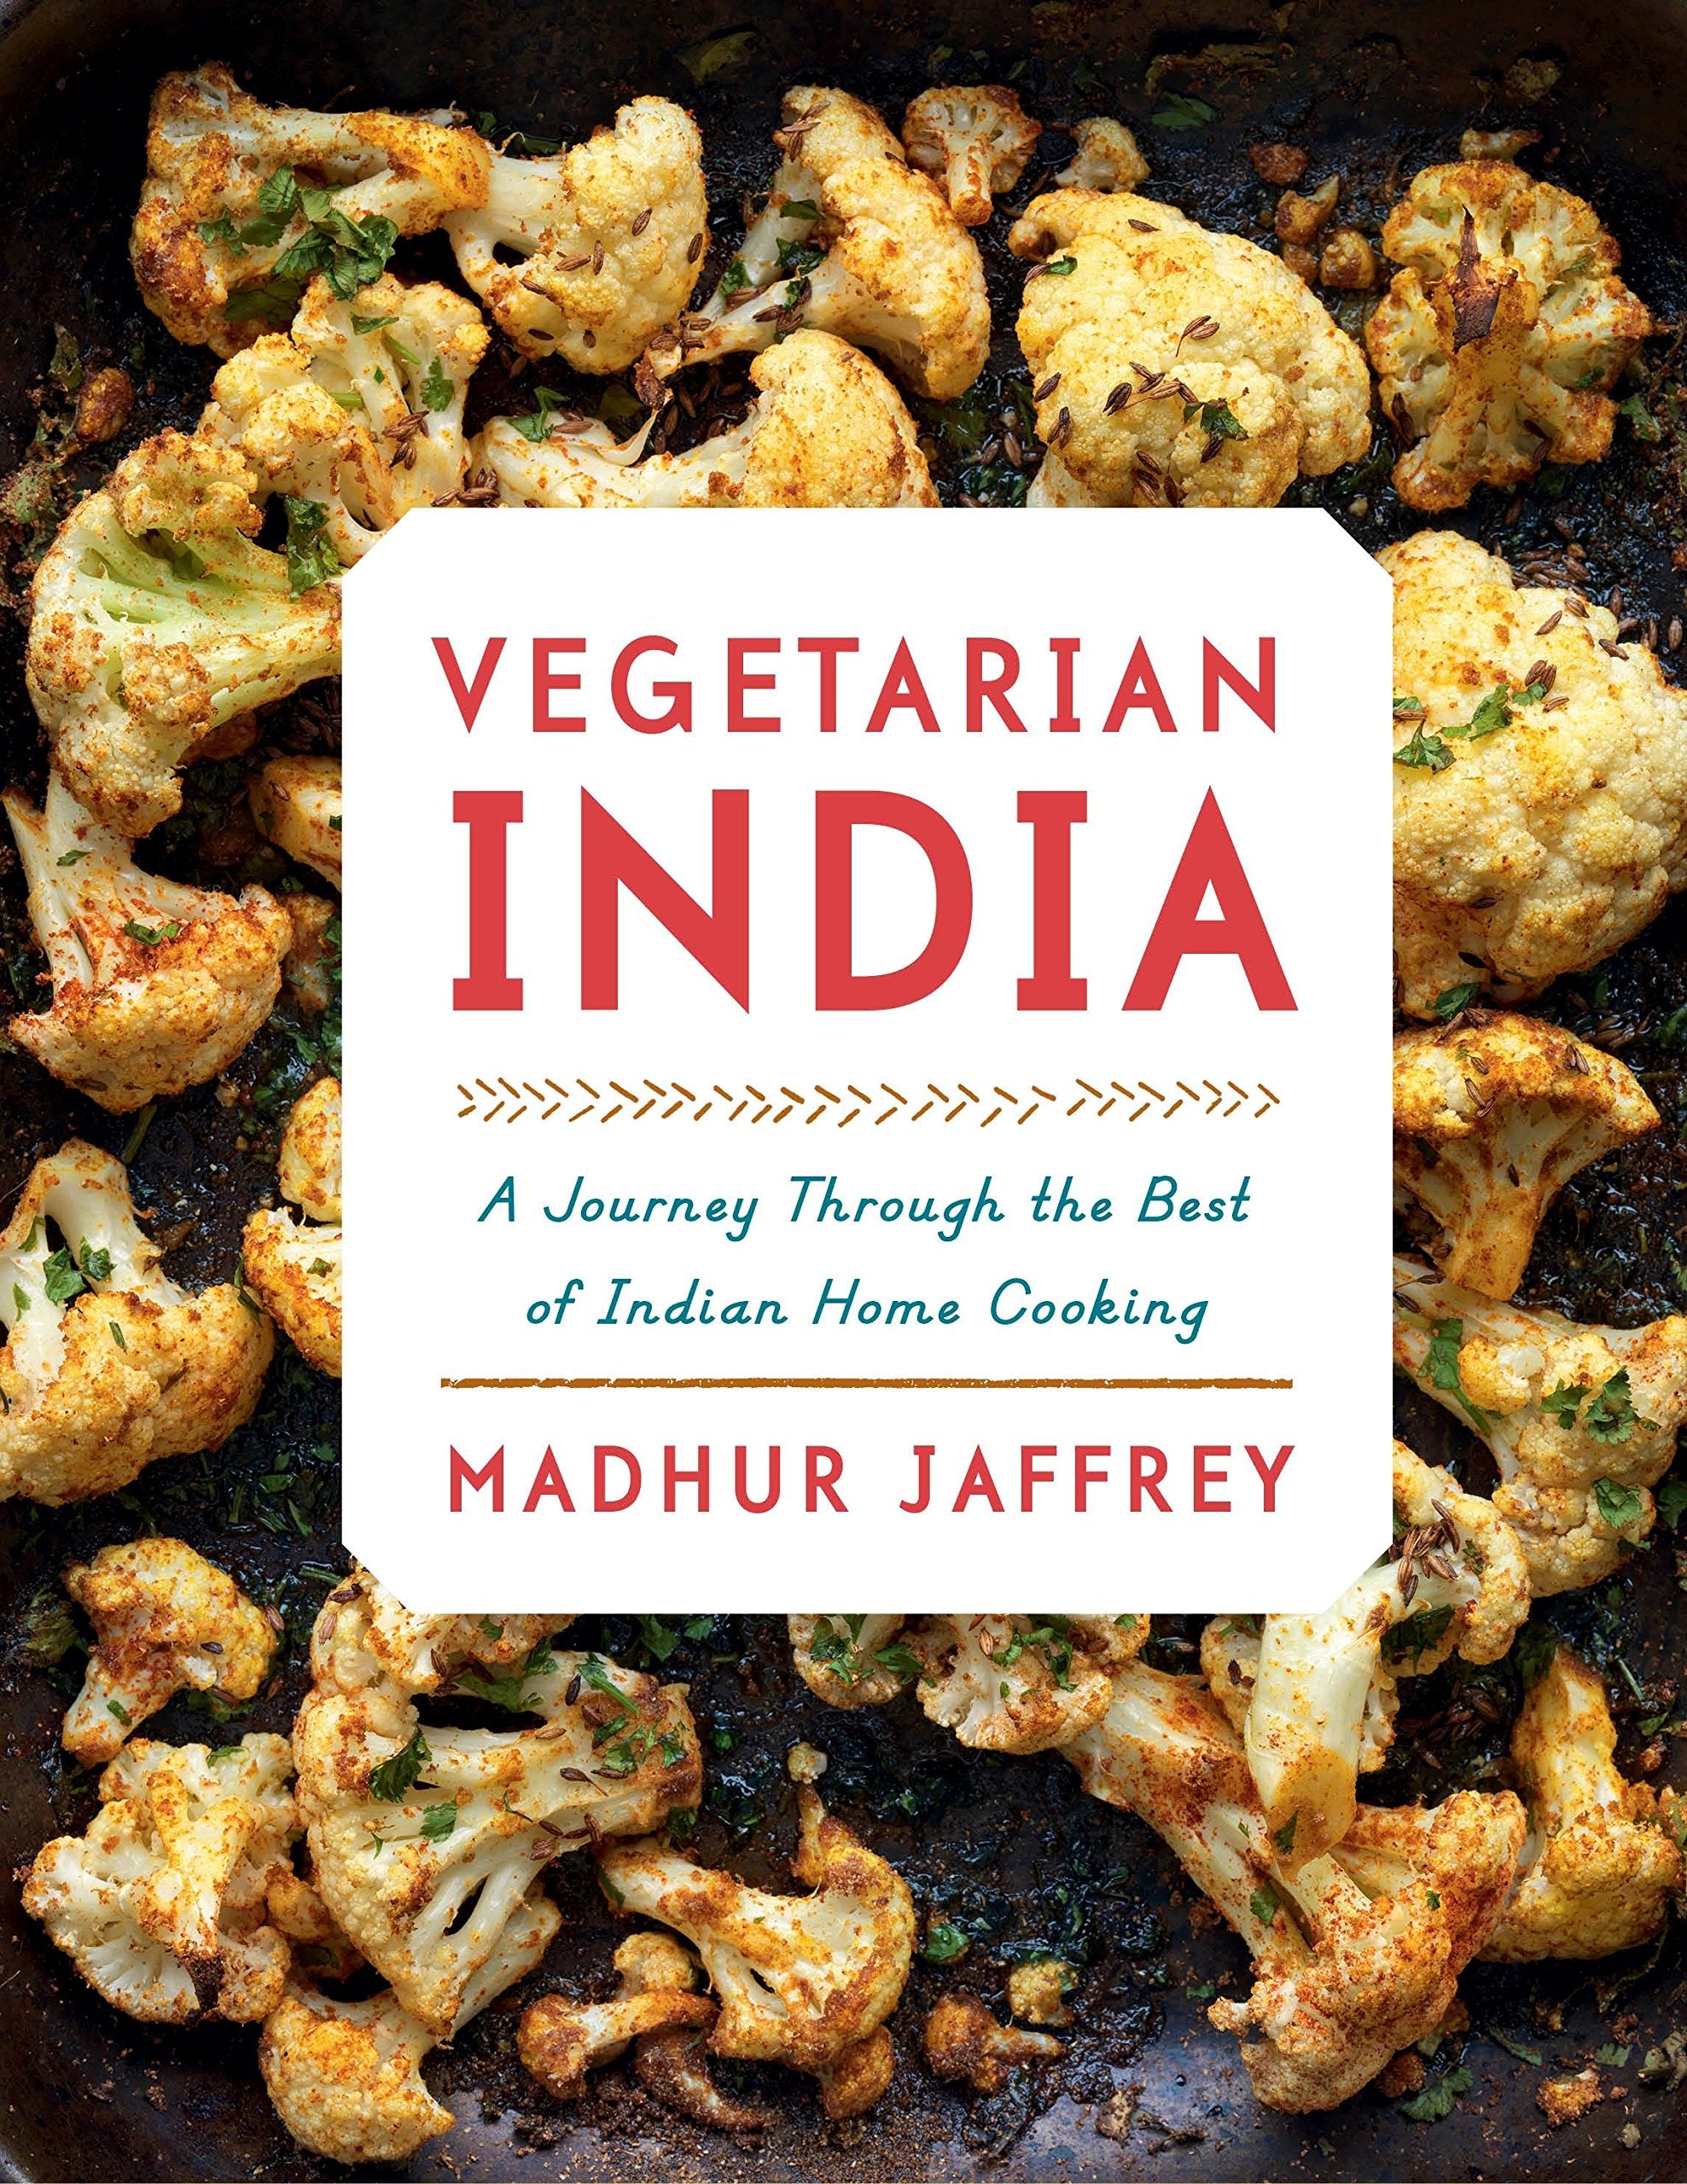 Vegetarian India: A Journey Through the Best of Indian Home Cooking (Madhur Jaffrey)